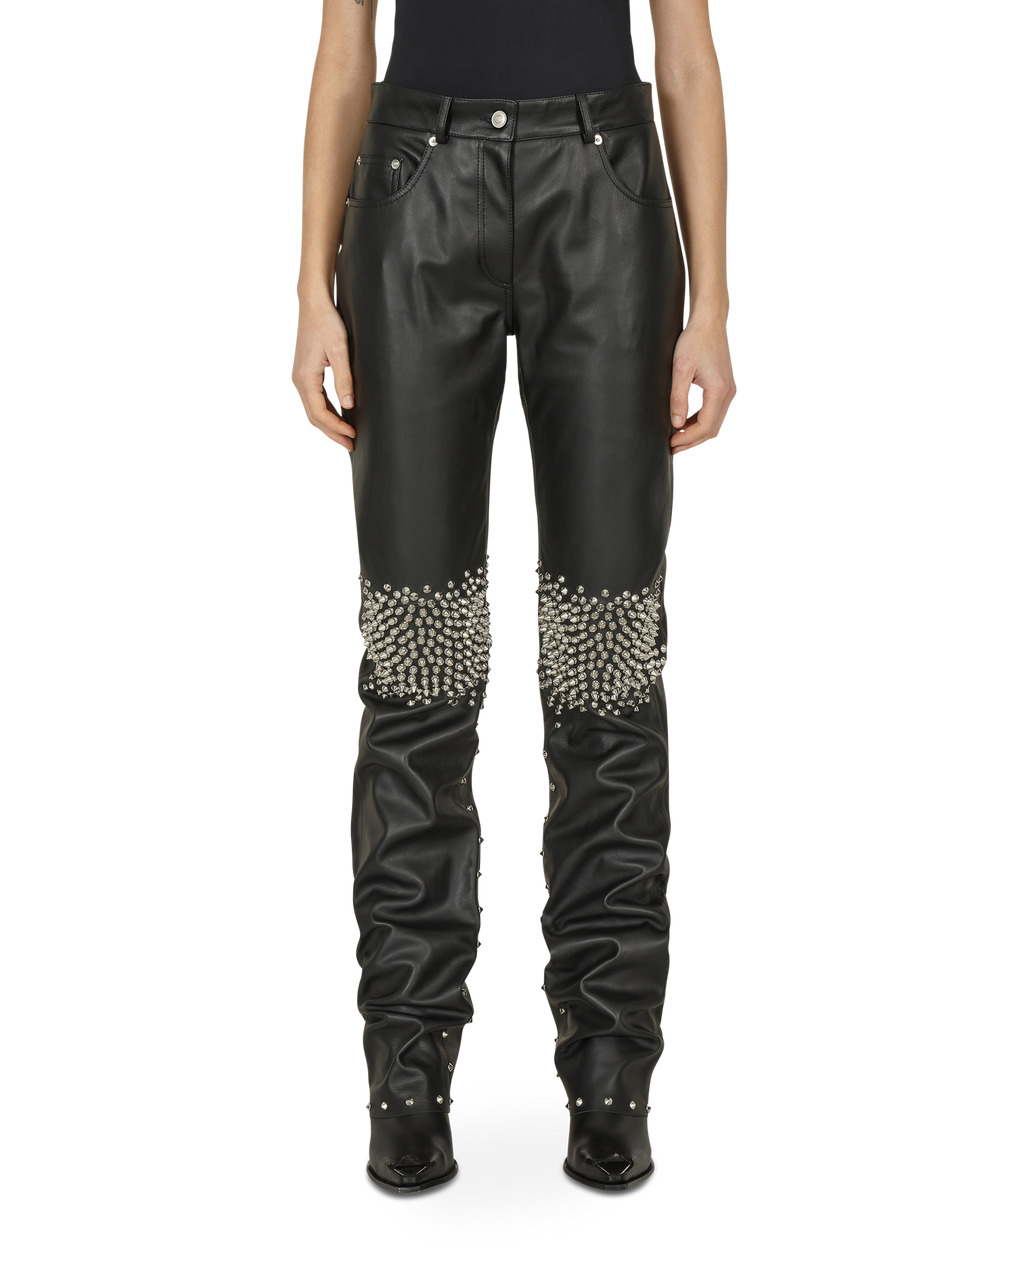 STUDDED LEATHER PANT - 2